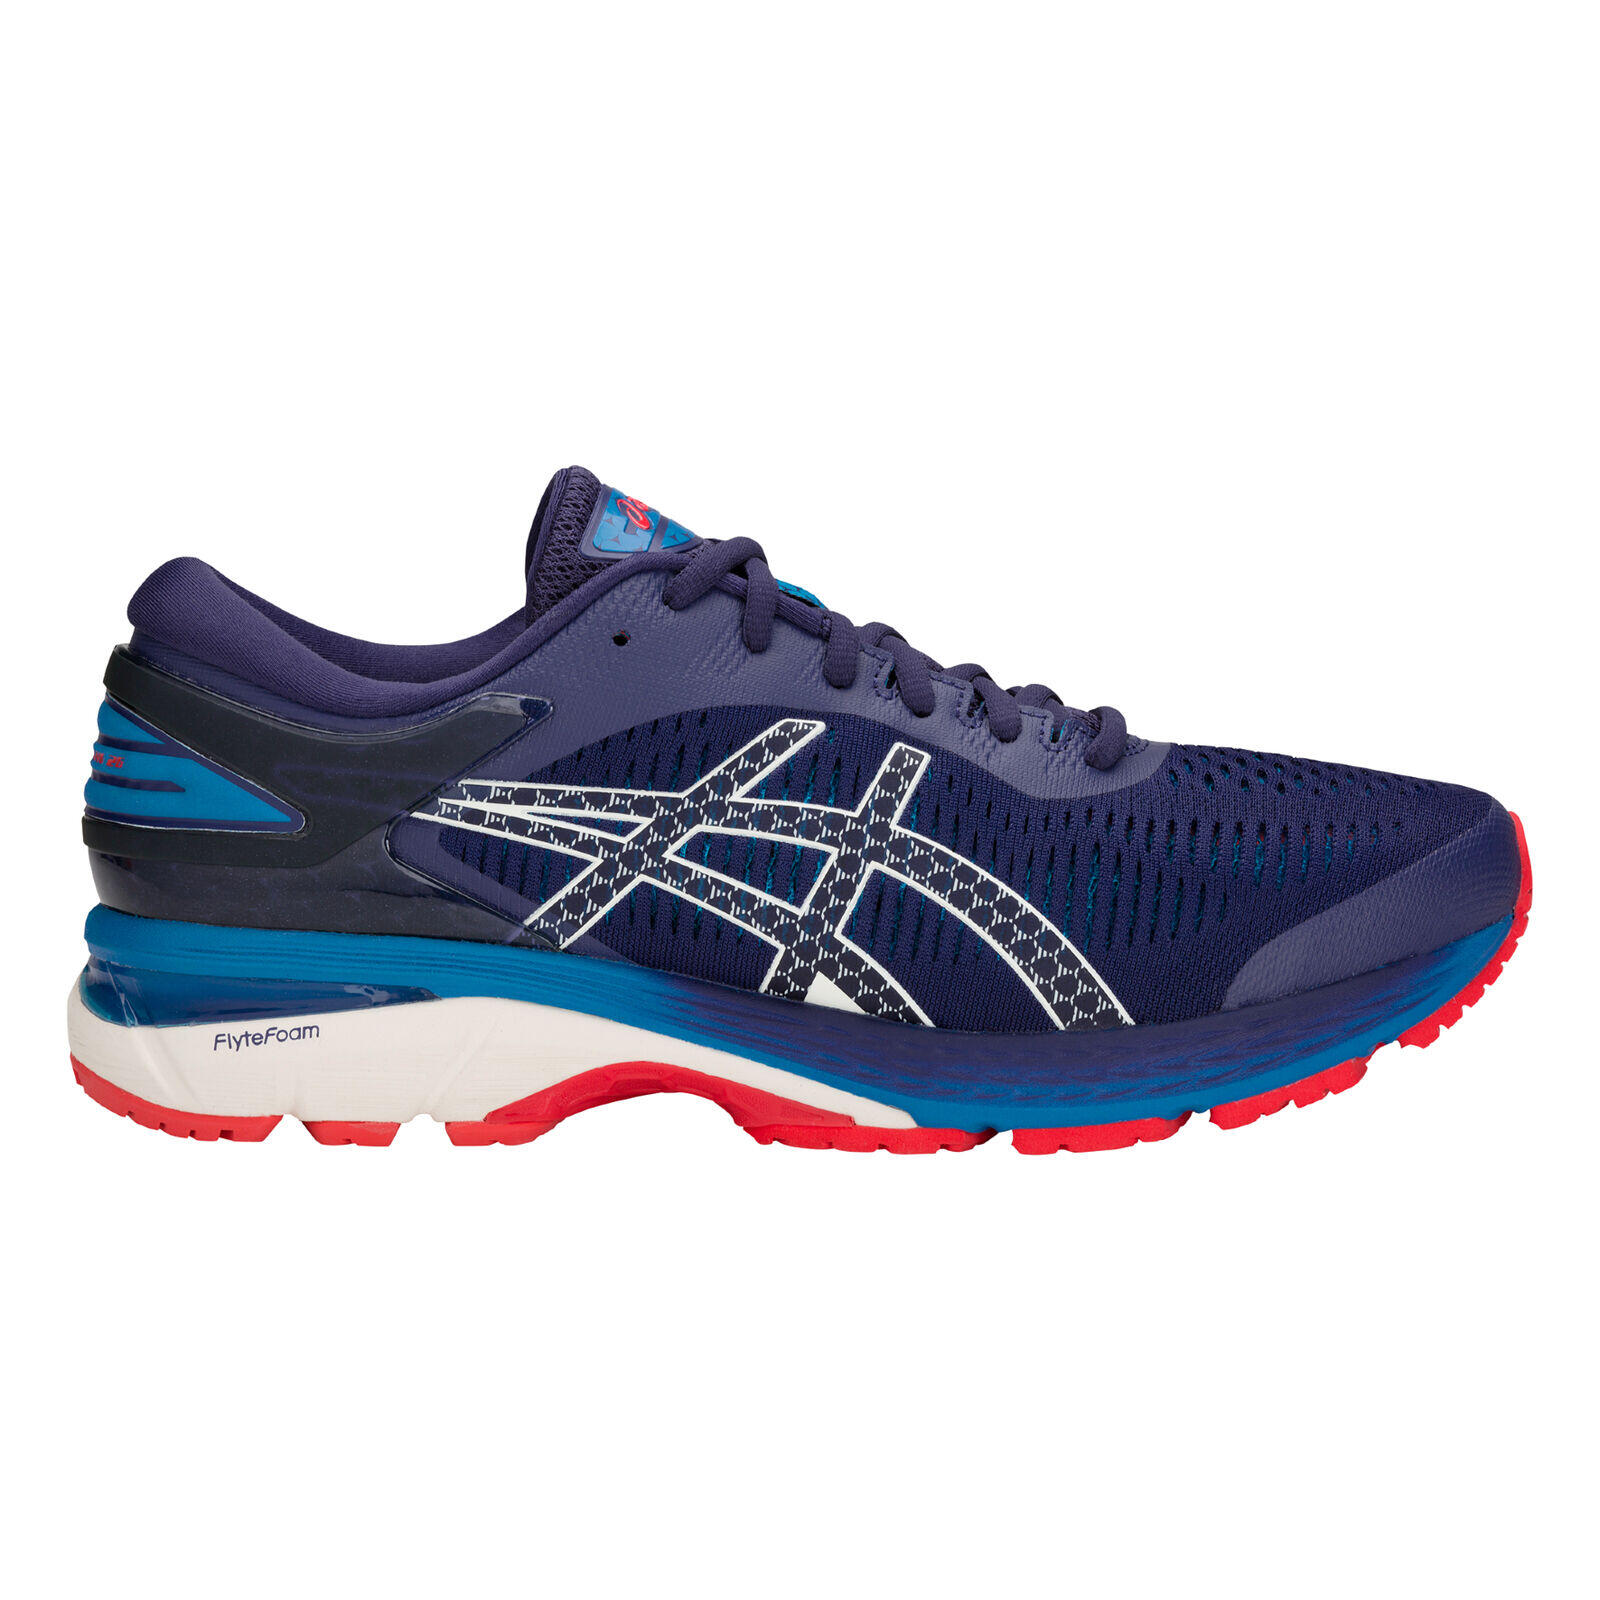 Asics Gel-Kayano 25 Mens Trainers 1011A019-400 1/3